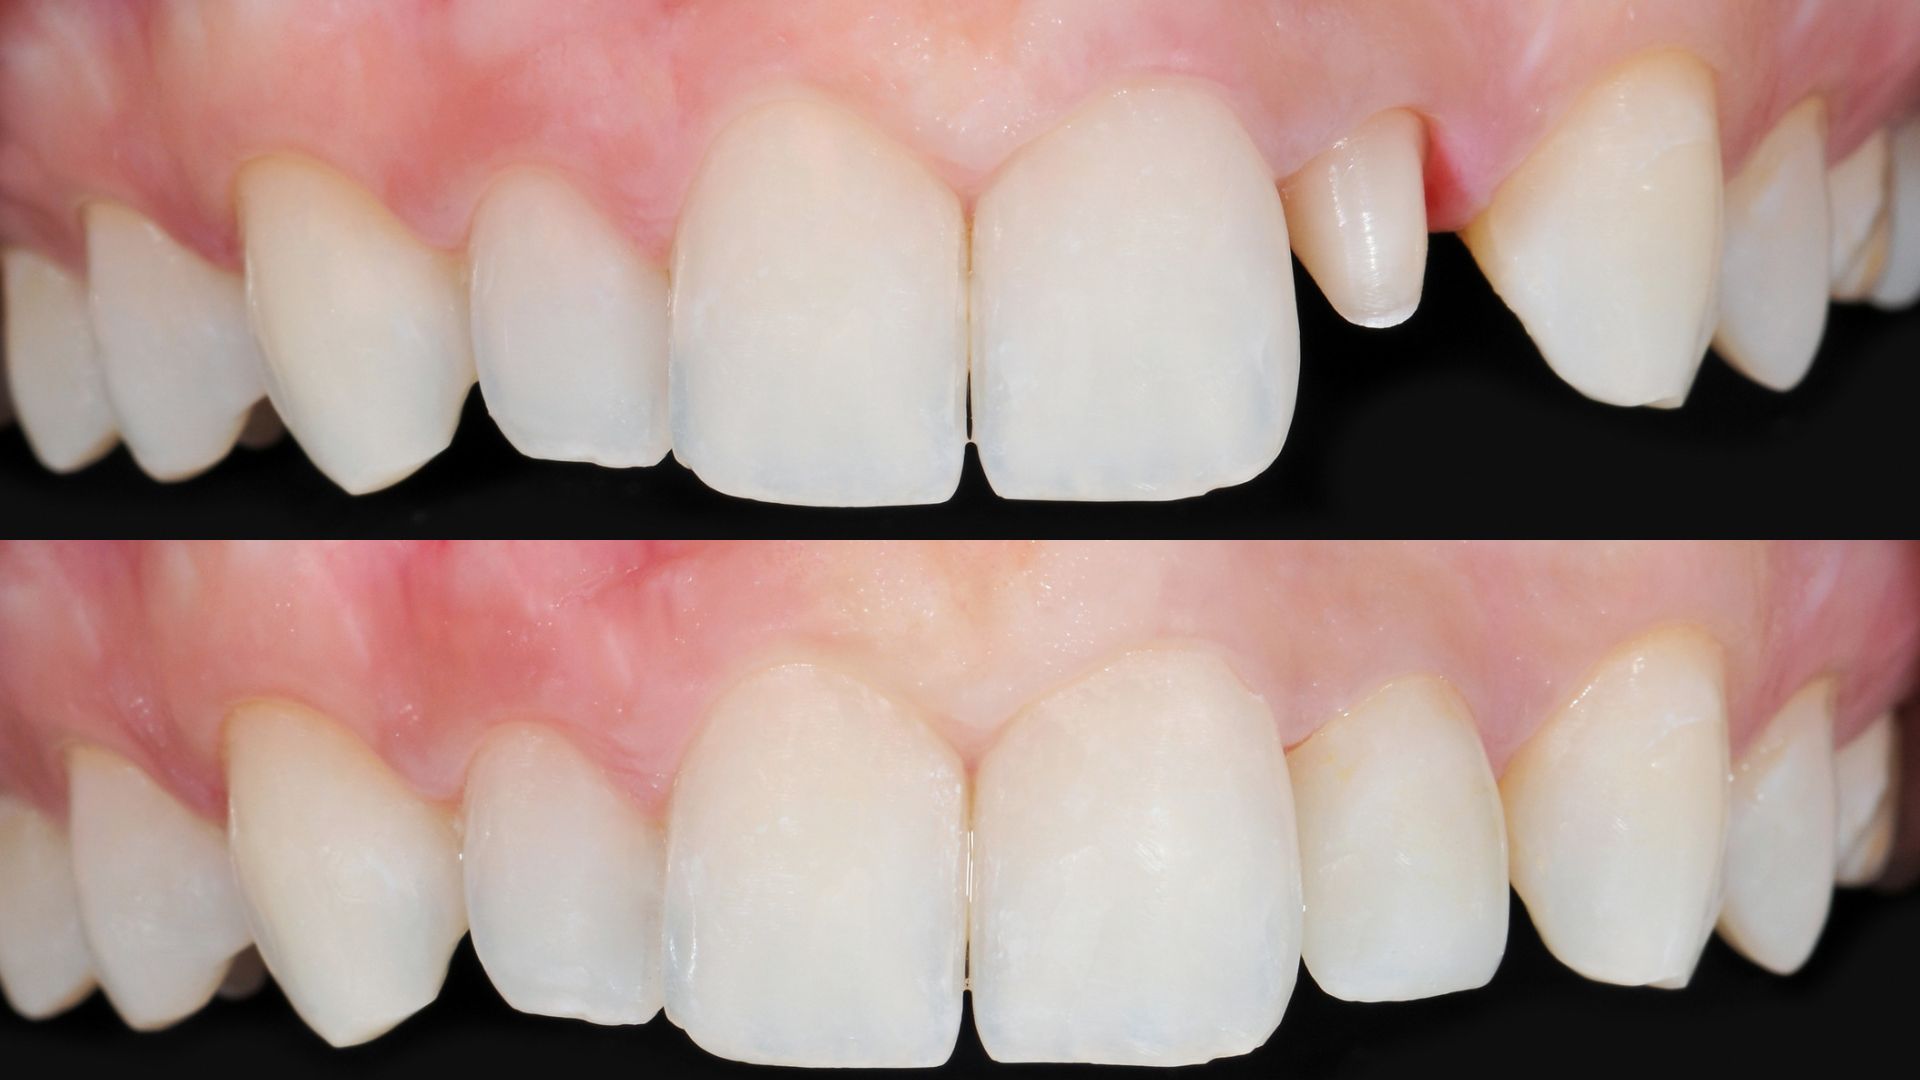 before and after Dental Crown and Bridges in Chandigarh